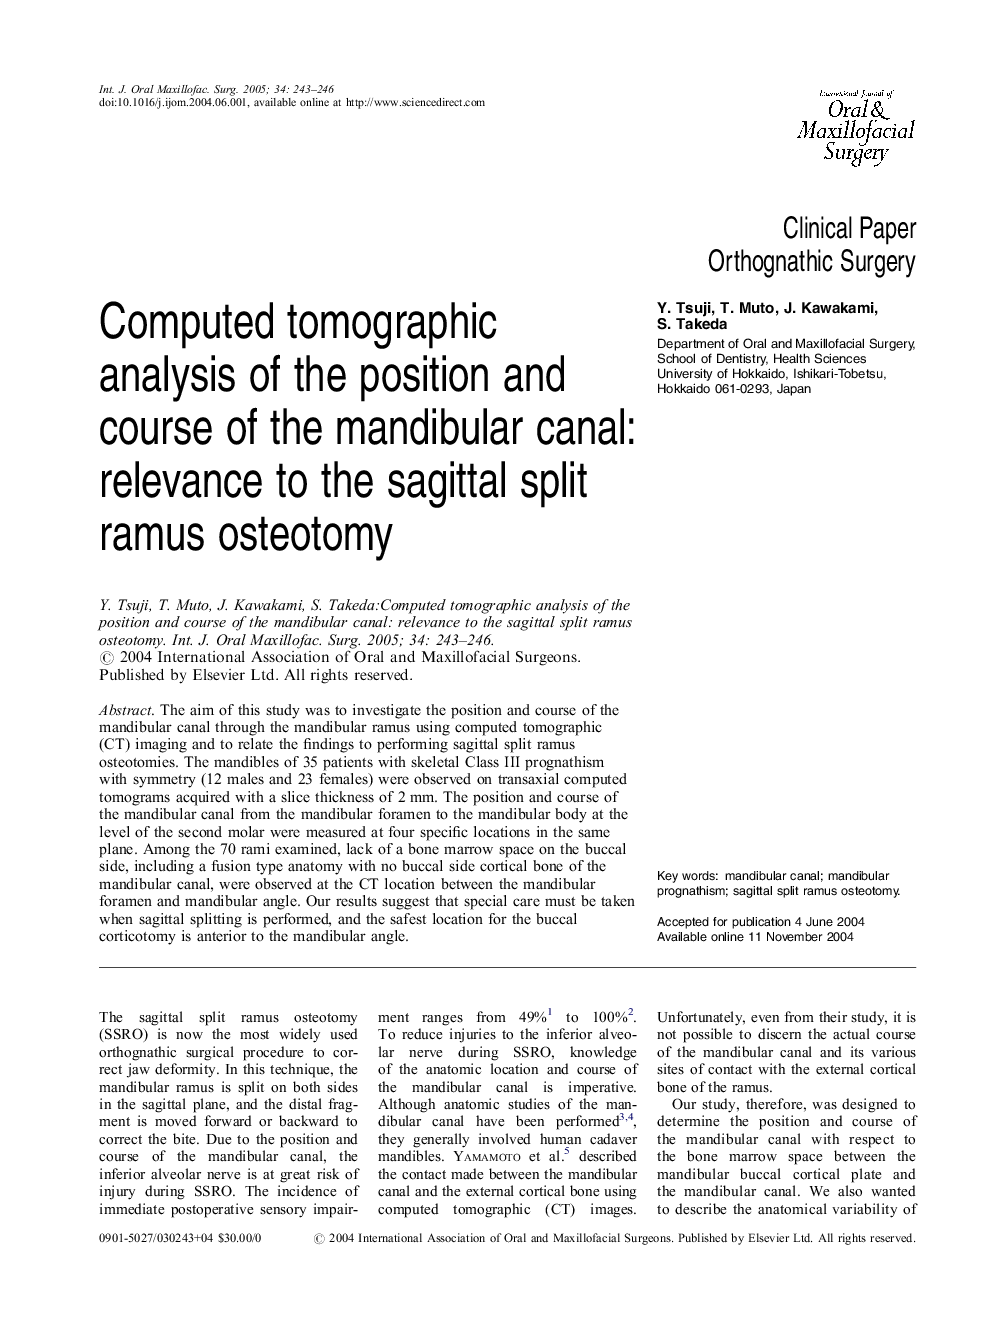 Computed tomographic analysis of the position and course of the mandibular canal: relevance to the sagittal split ramus osteotomy